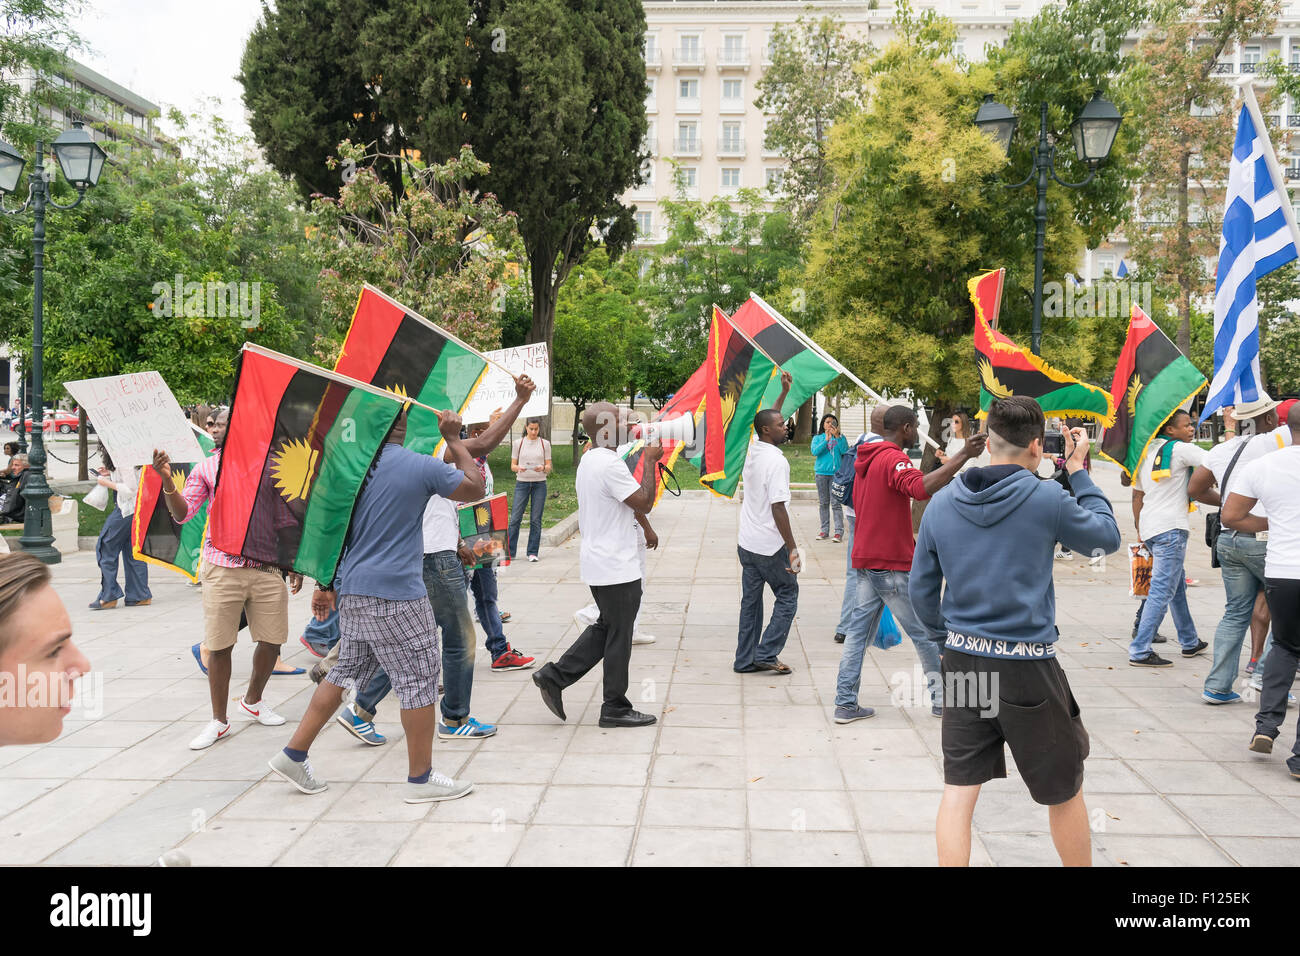 DATE: 30 may 2015. LOCATION: Sintagma in Athens Greece. EVENT: the 30th may rally day in remembrance of Biafrans fallen heroes. Stock Photo